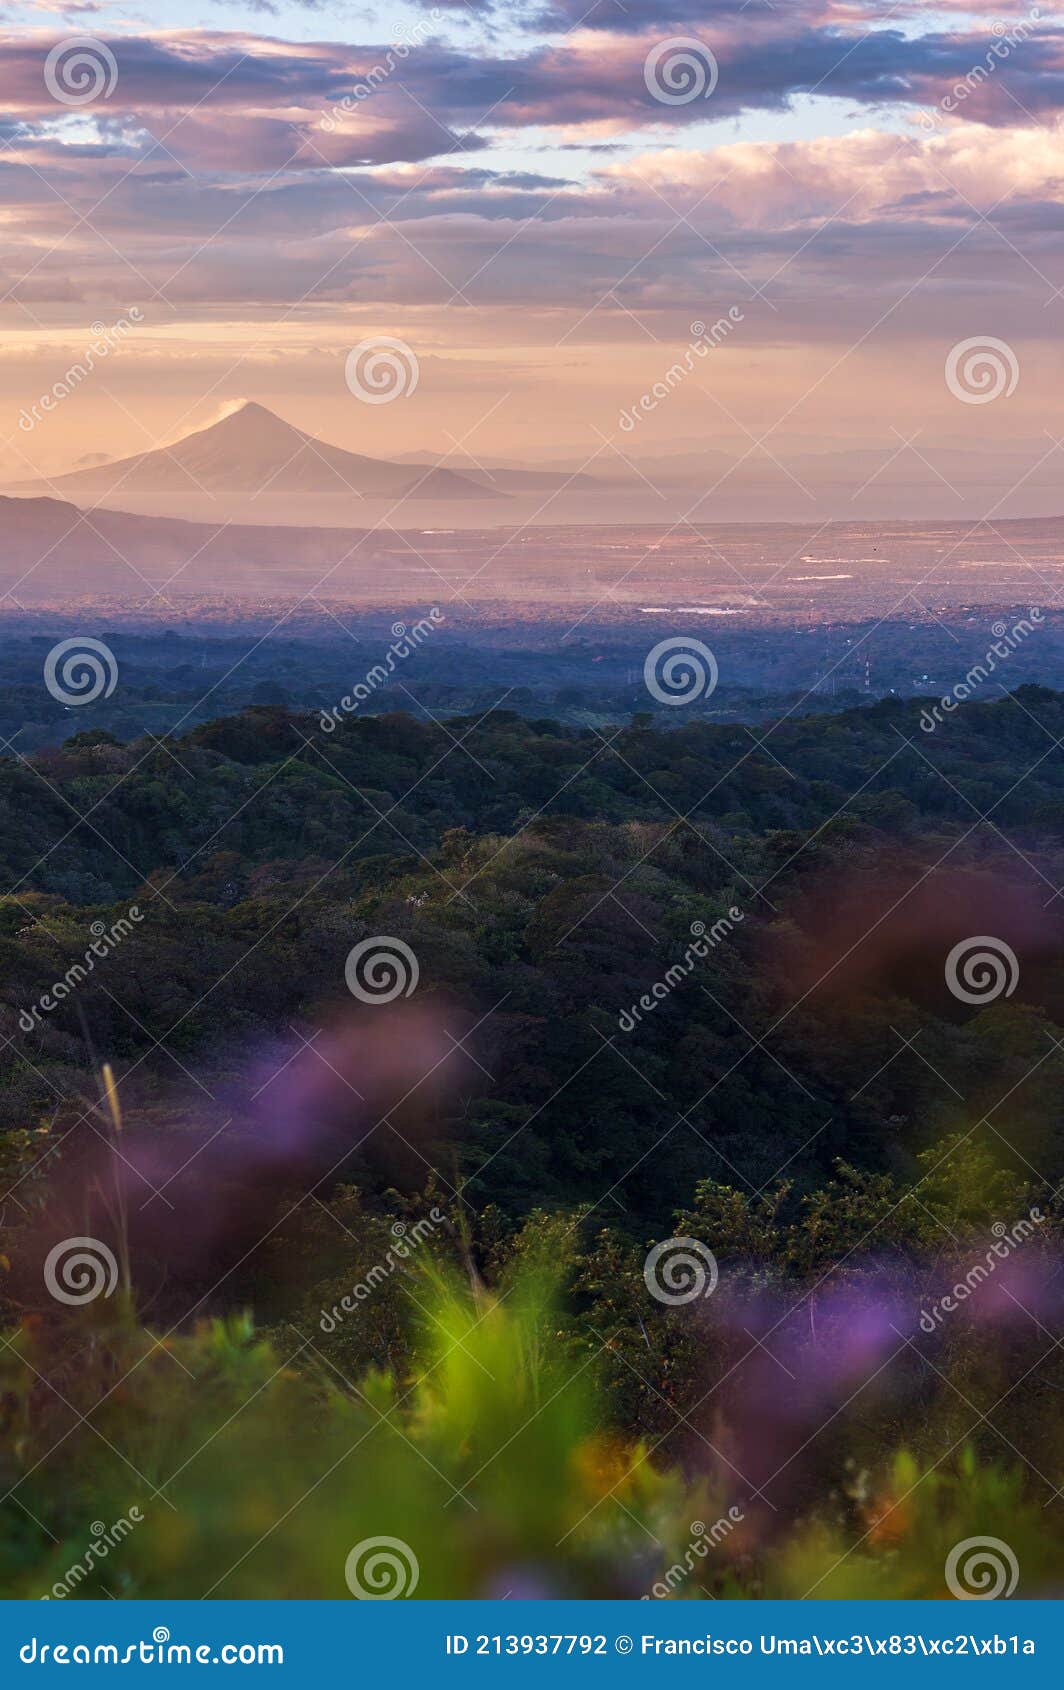 beautiful view of the momotombo volcano on lake managua in nicaragua at sunset with purple flowers out of focus in the foreground